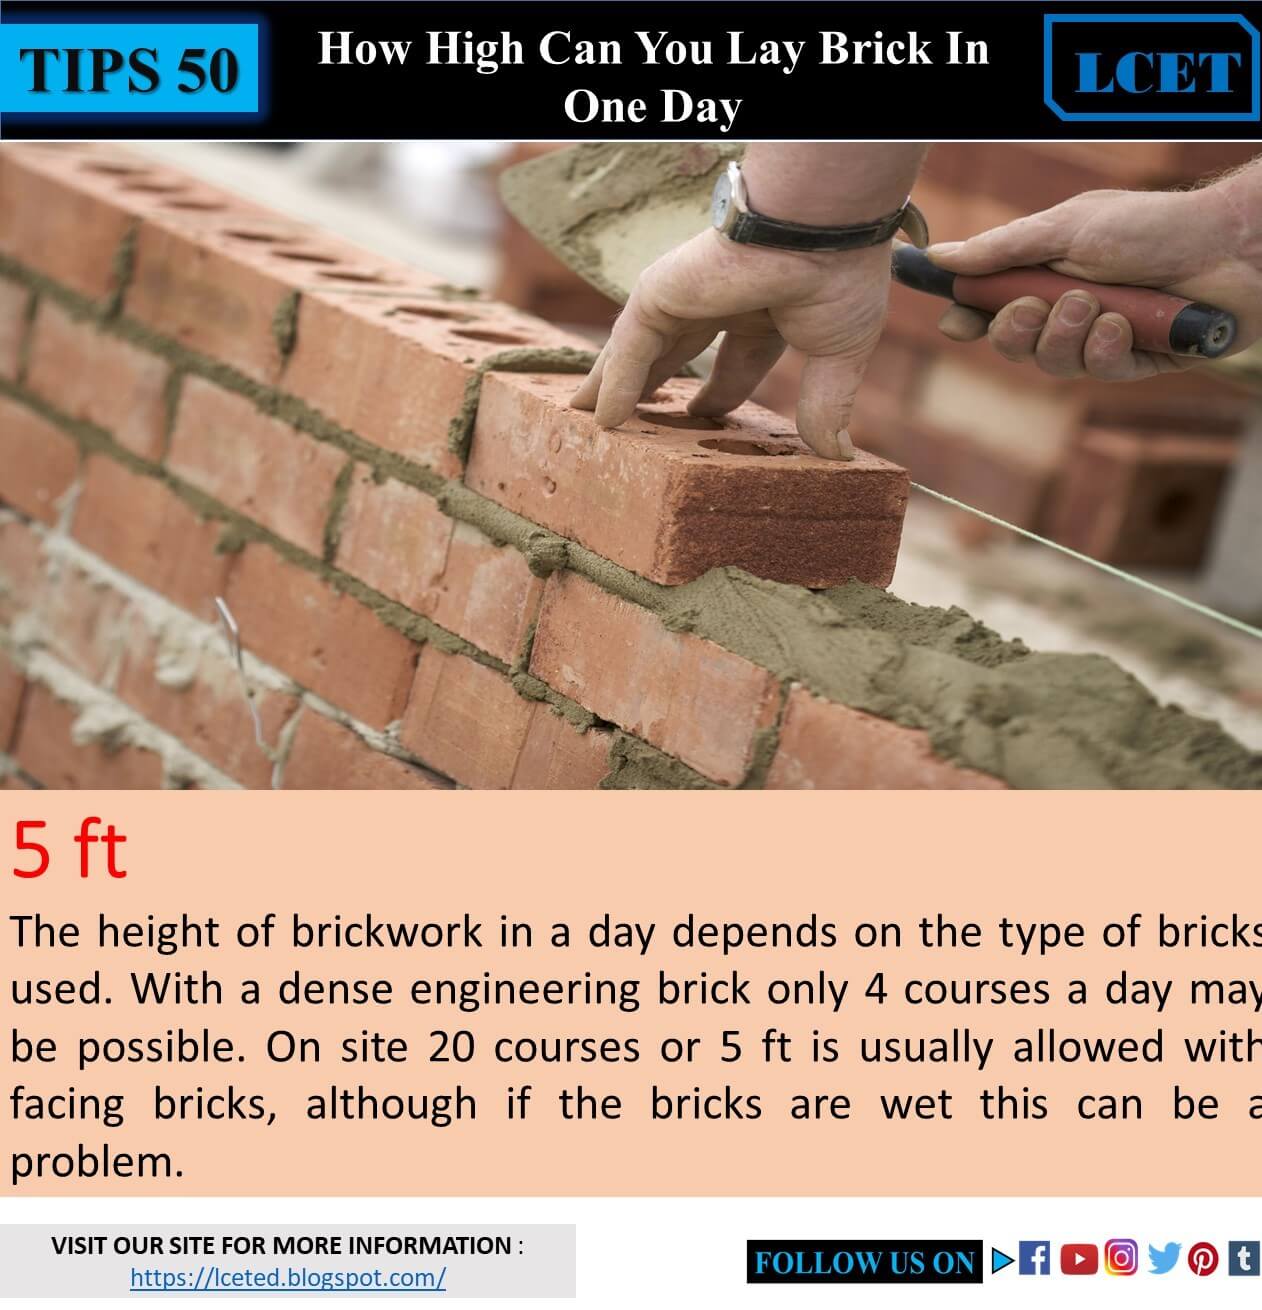 TIPS FOR CIVIL ENGINEERS